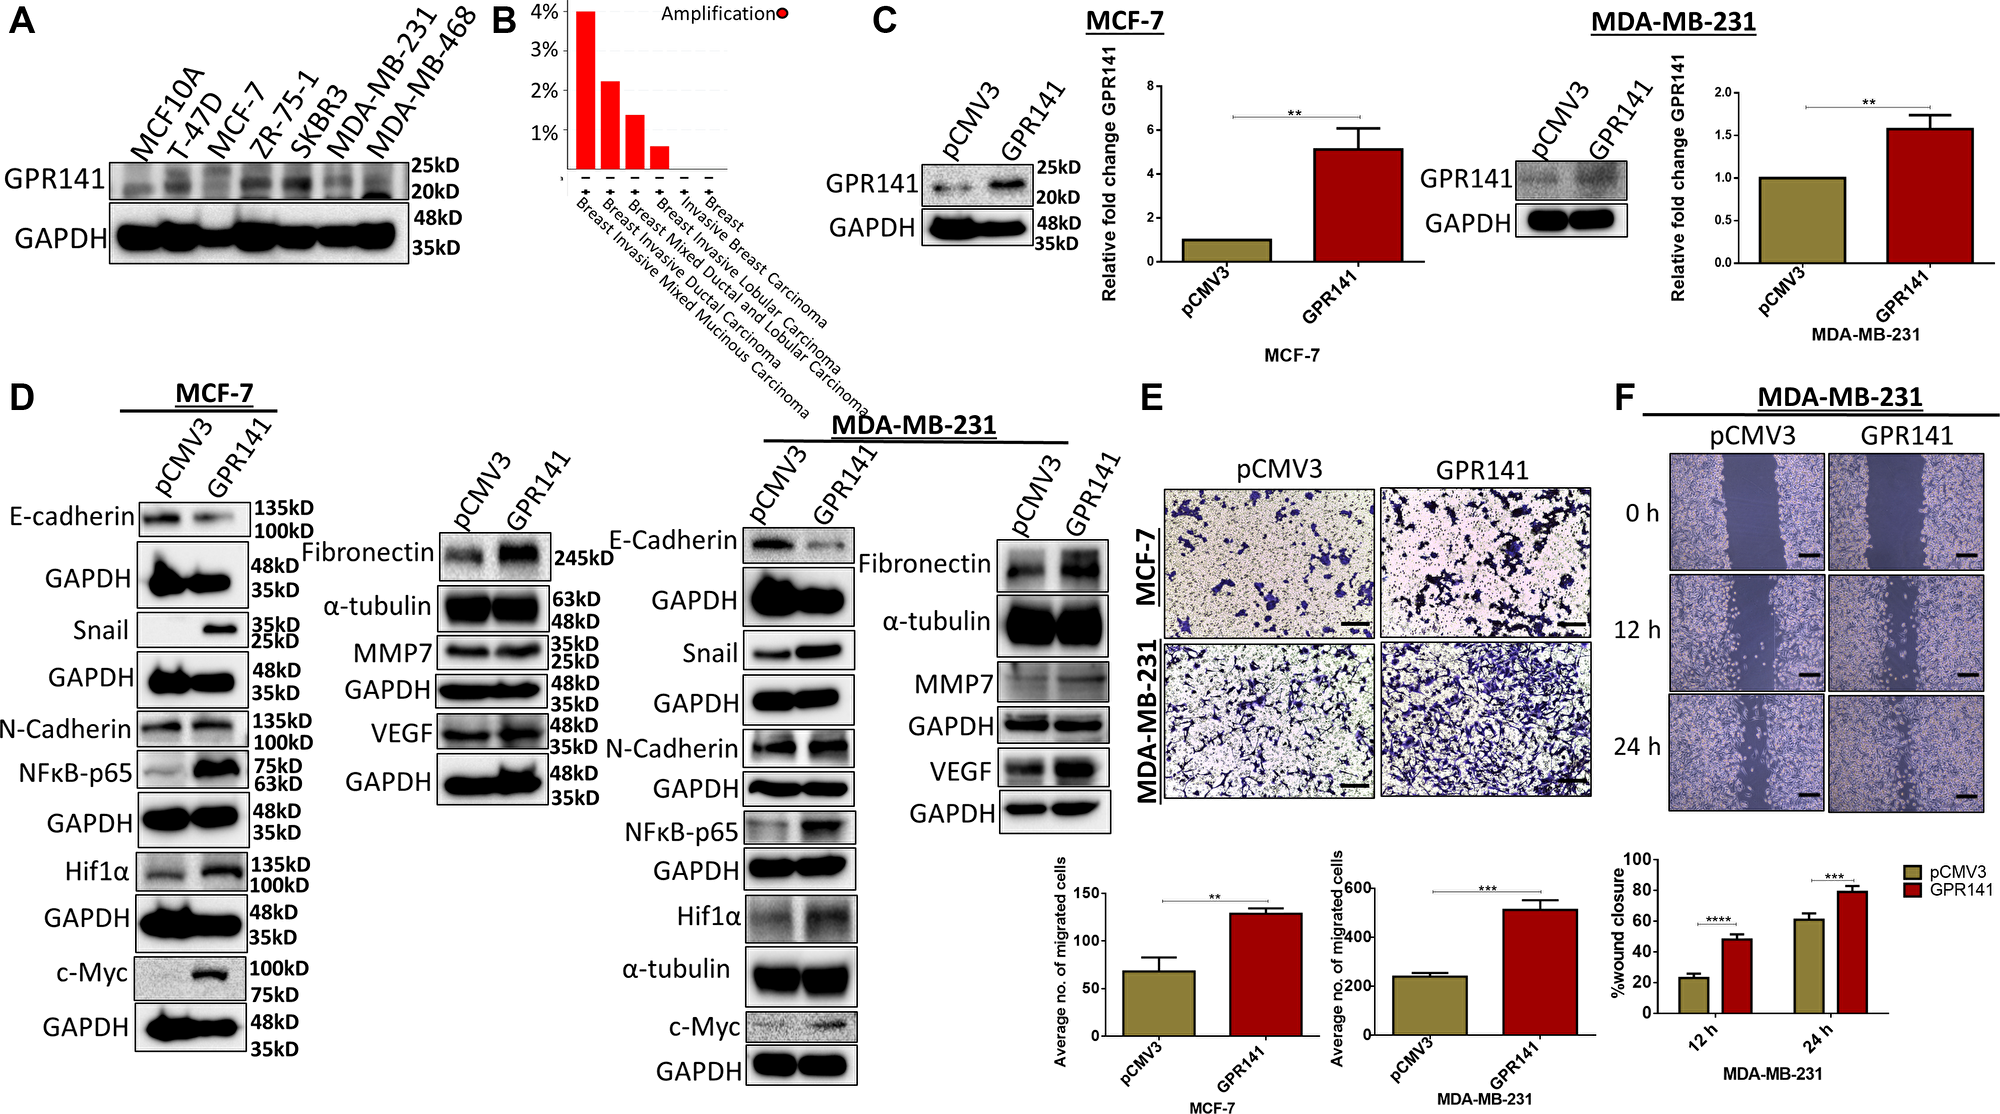 GPR141 overexpression in breast carcinoma induces the expression level of oncogenic mediators and EMT markers and influences tumor niche in vitro.